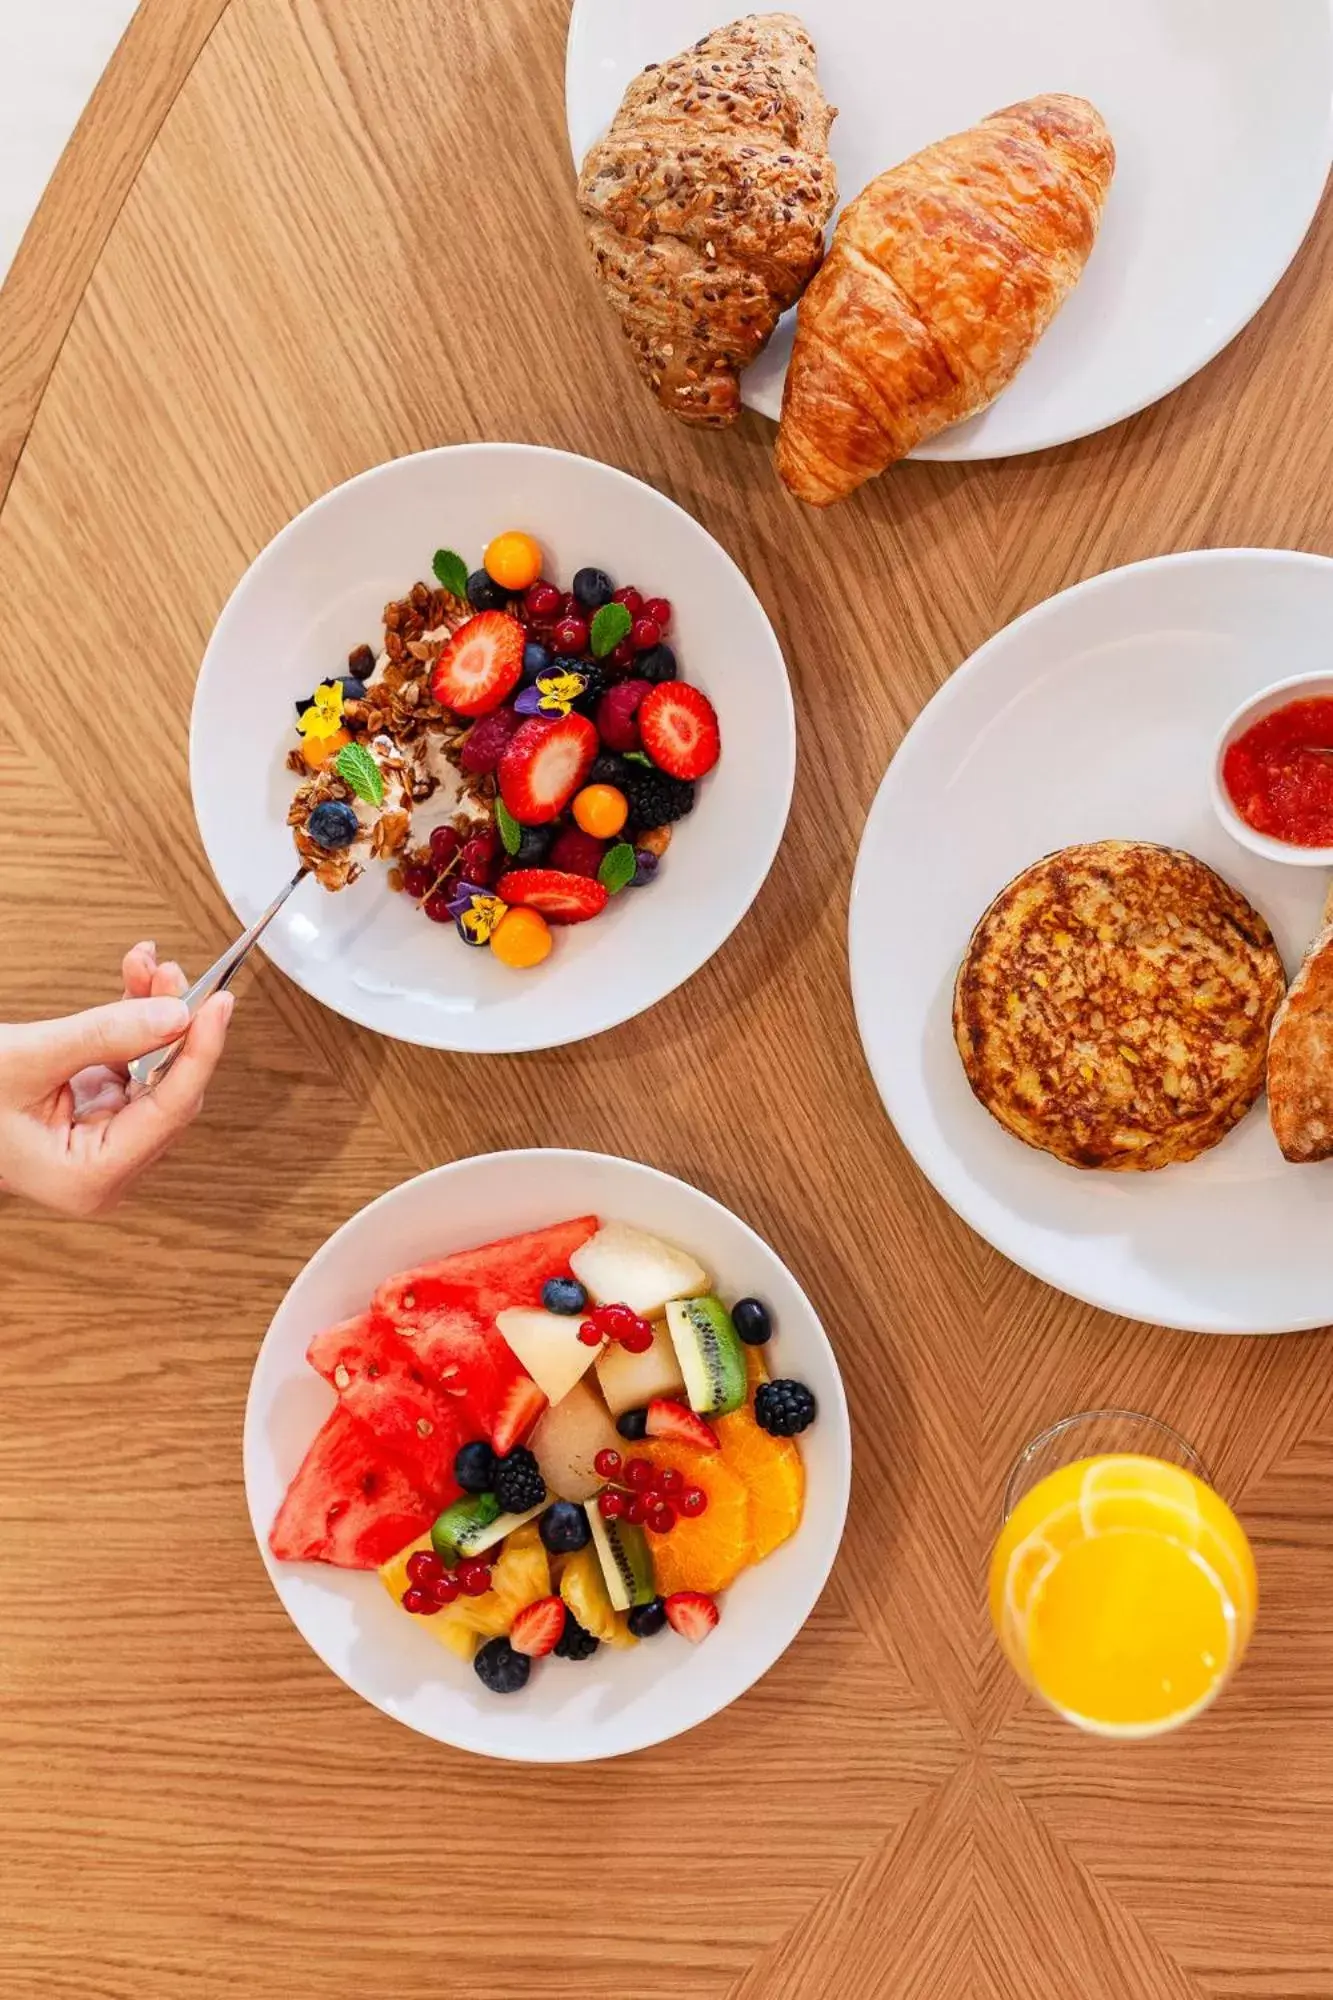 Breakfast in The Standard, Ibiza - Adults Only